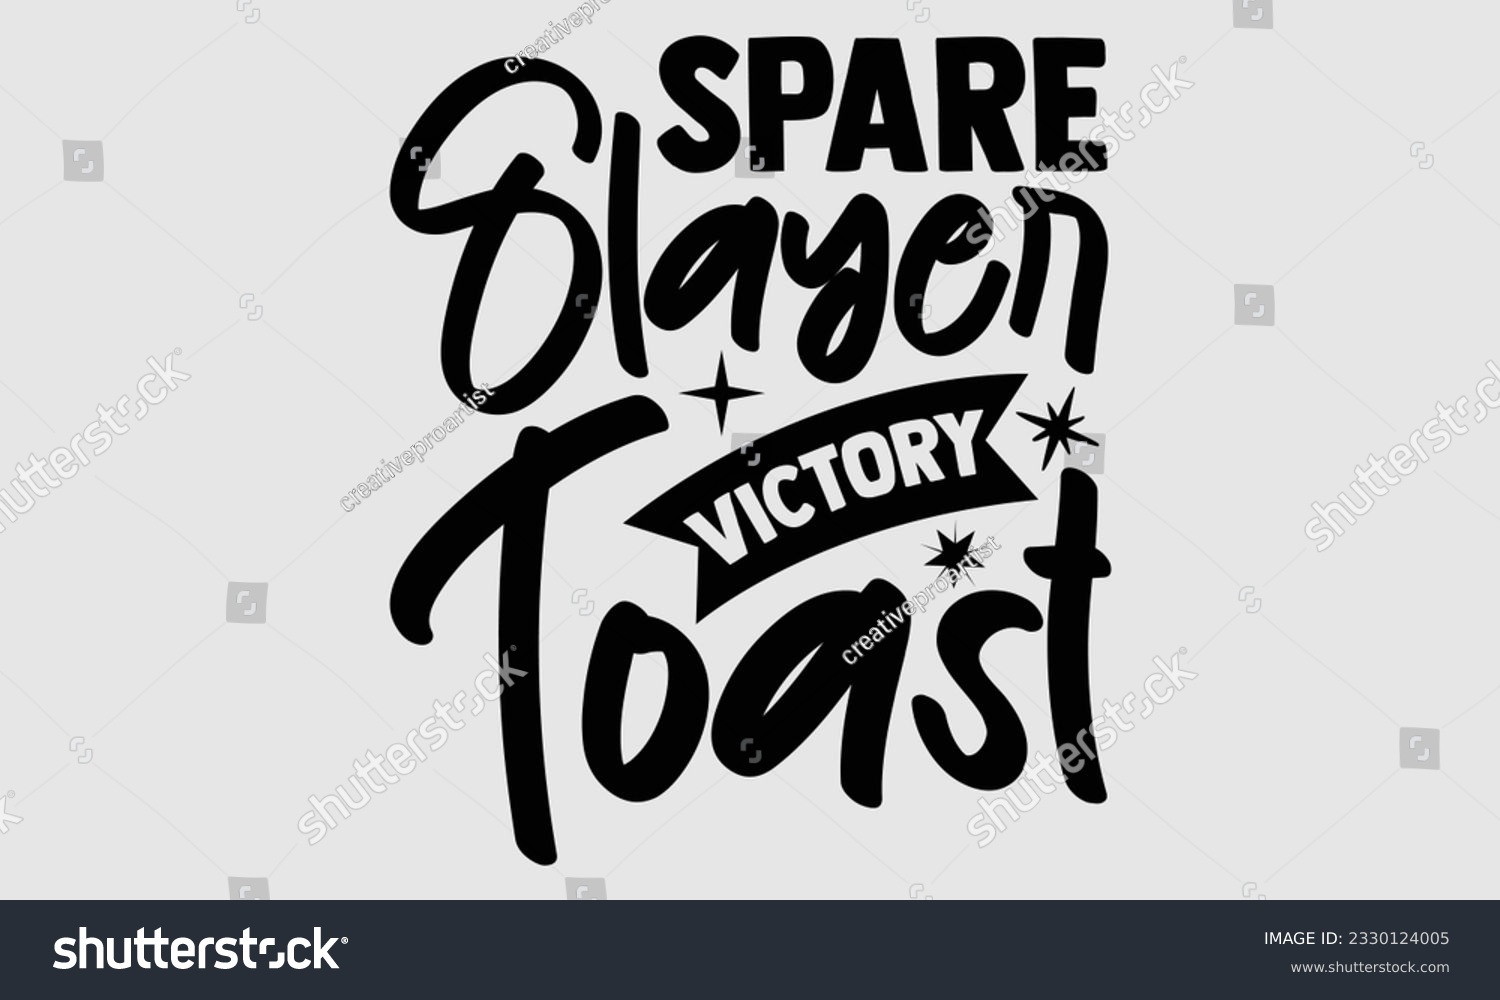 SVG of Spare Slayer Victory Toast- Bowling t-shirt design, Illustration for prints on SVG and bags, posters, cards, greeting card template with typography text EPS svg